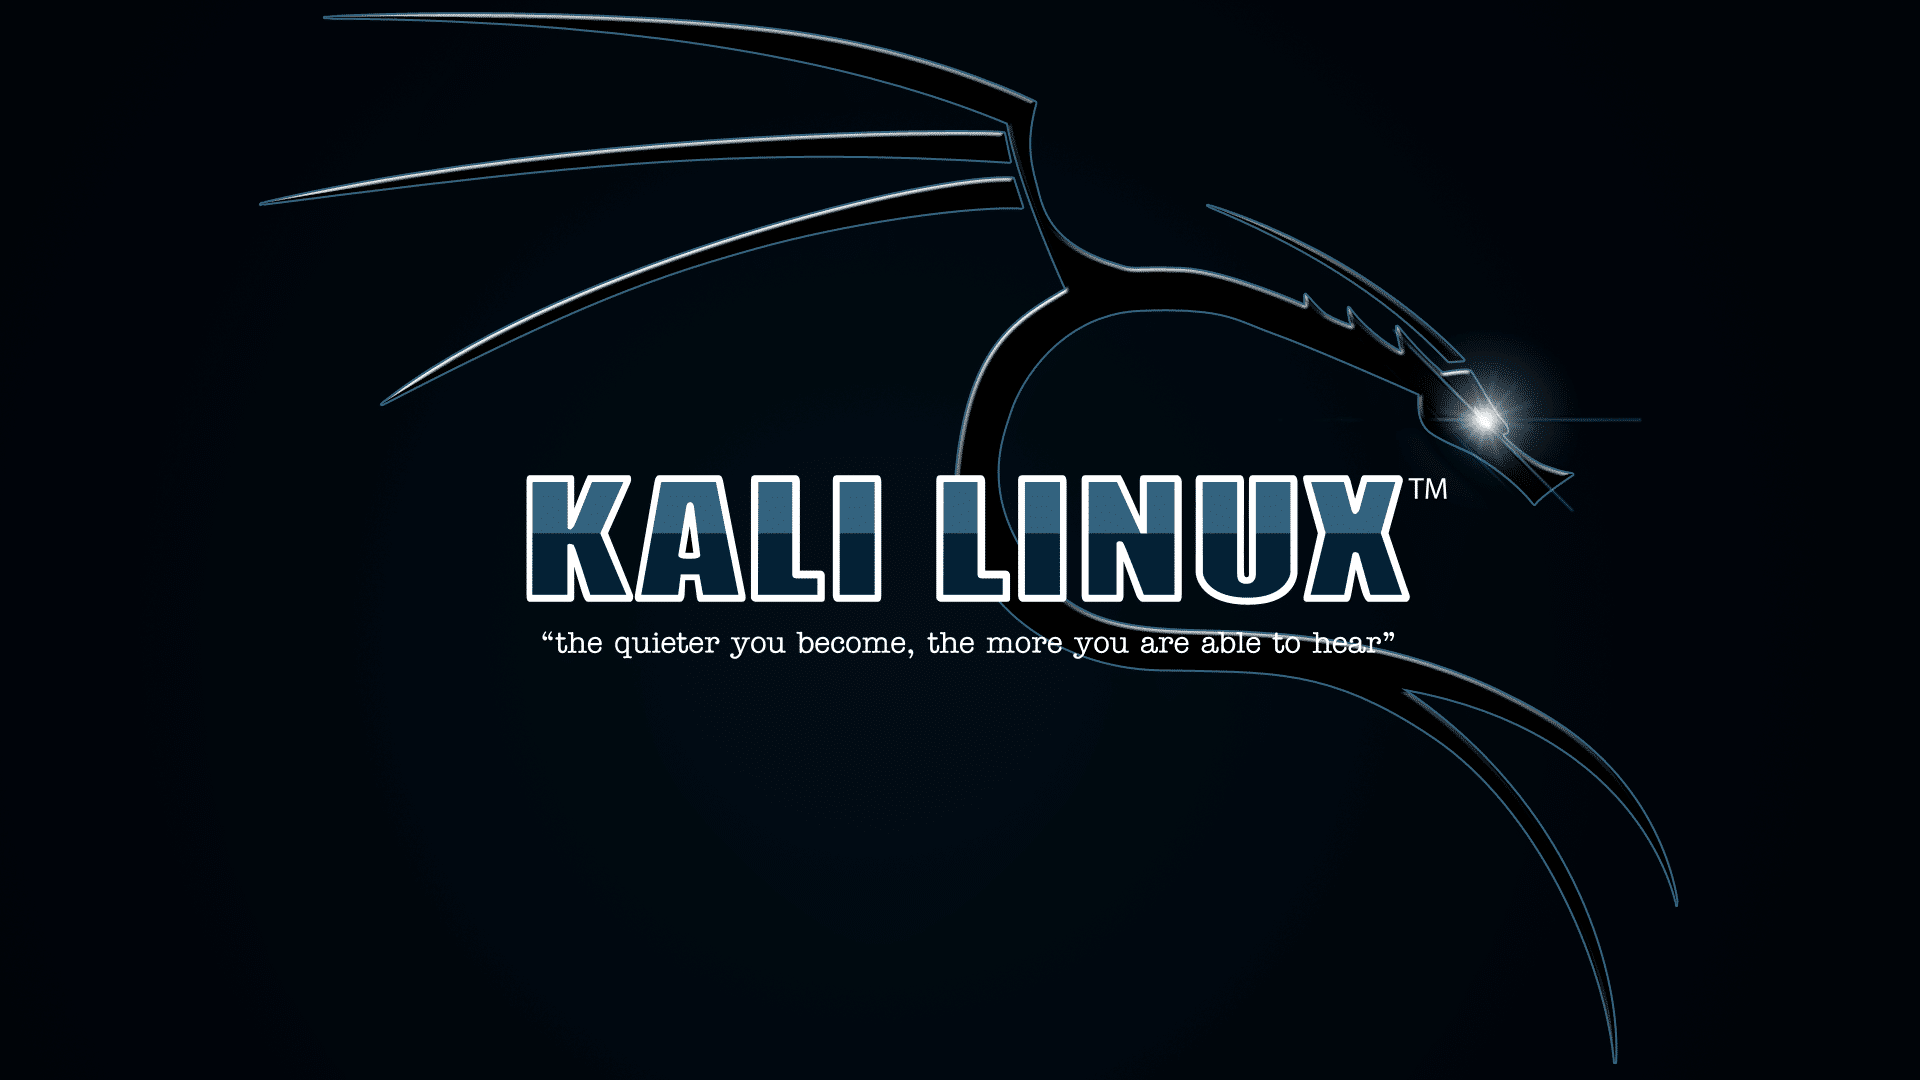 kali linux - the quieter you become, the more you are able to hear